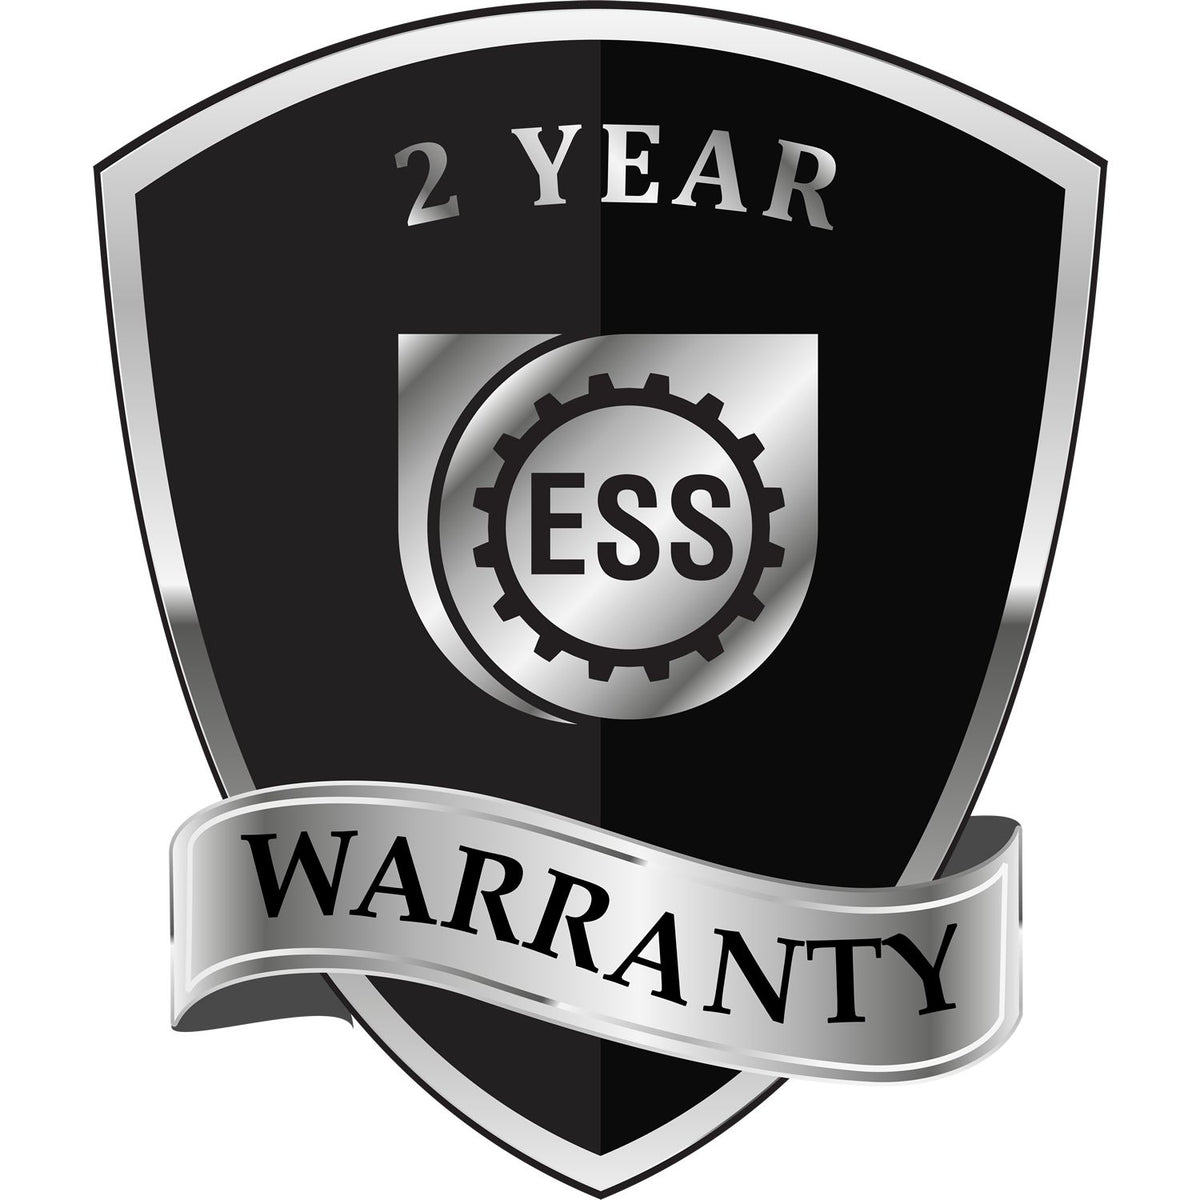 A black and silver badge or emblem showing warranty information for the State of Georgia Extended Long Reach Geologist Seal